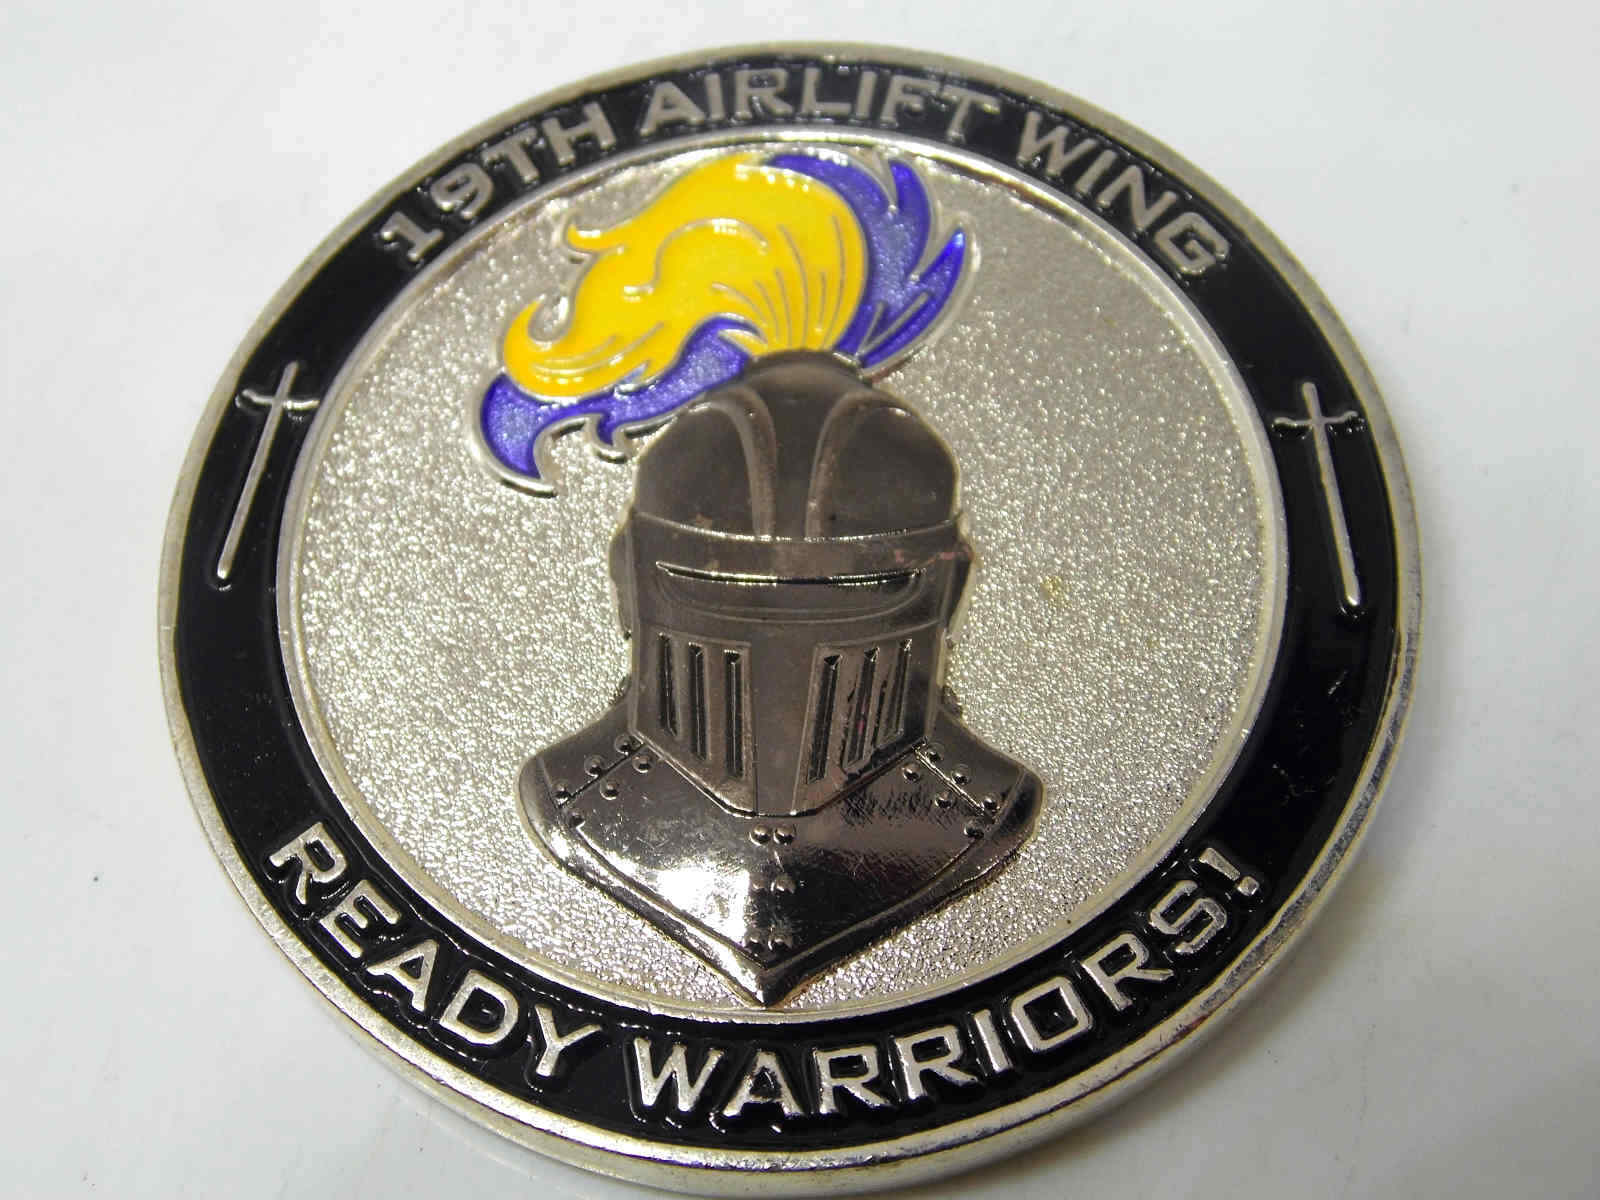 19TH AIRLIFT WING COMMANDER CHALLENGE COIN